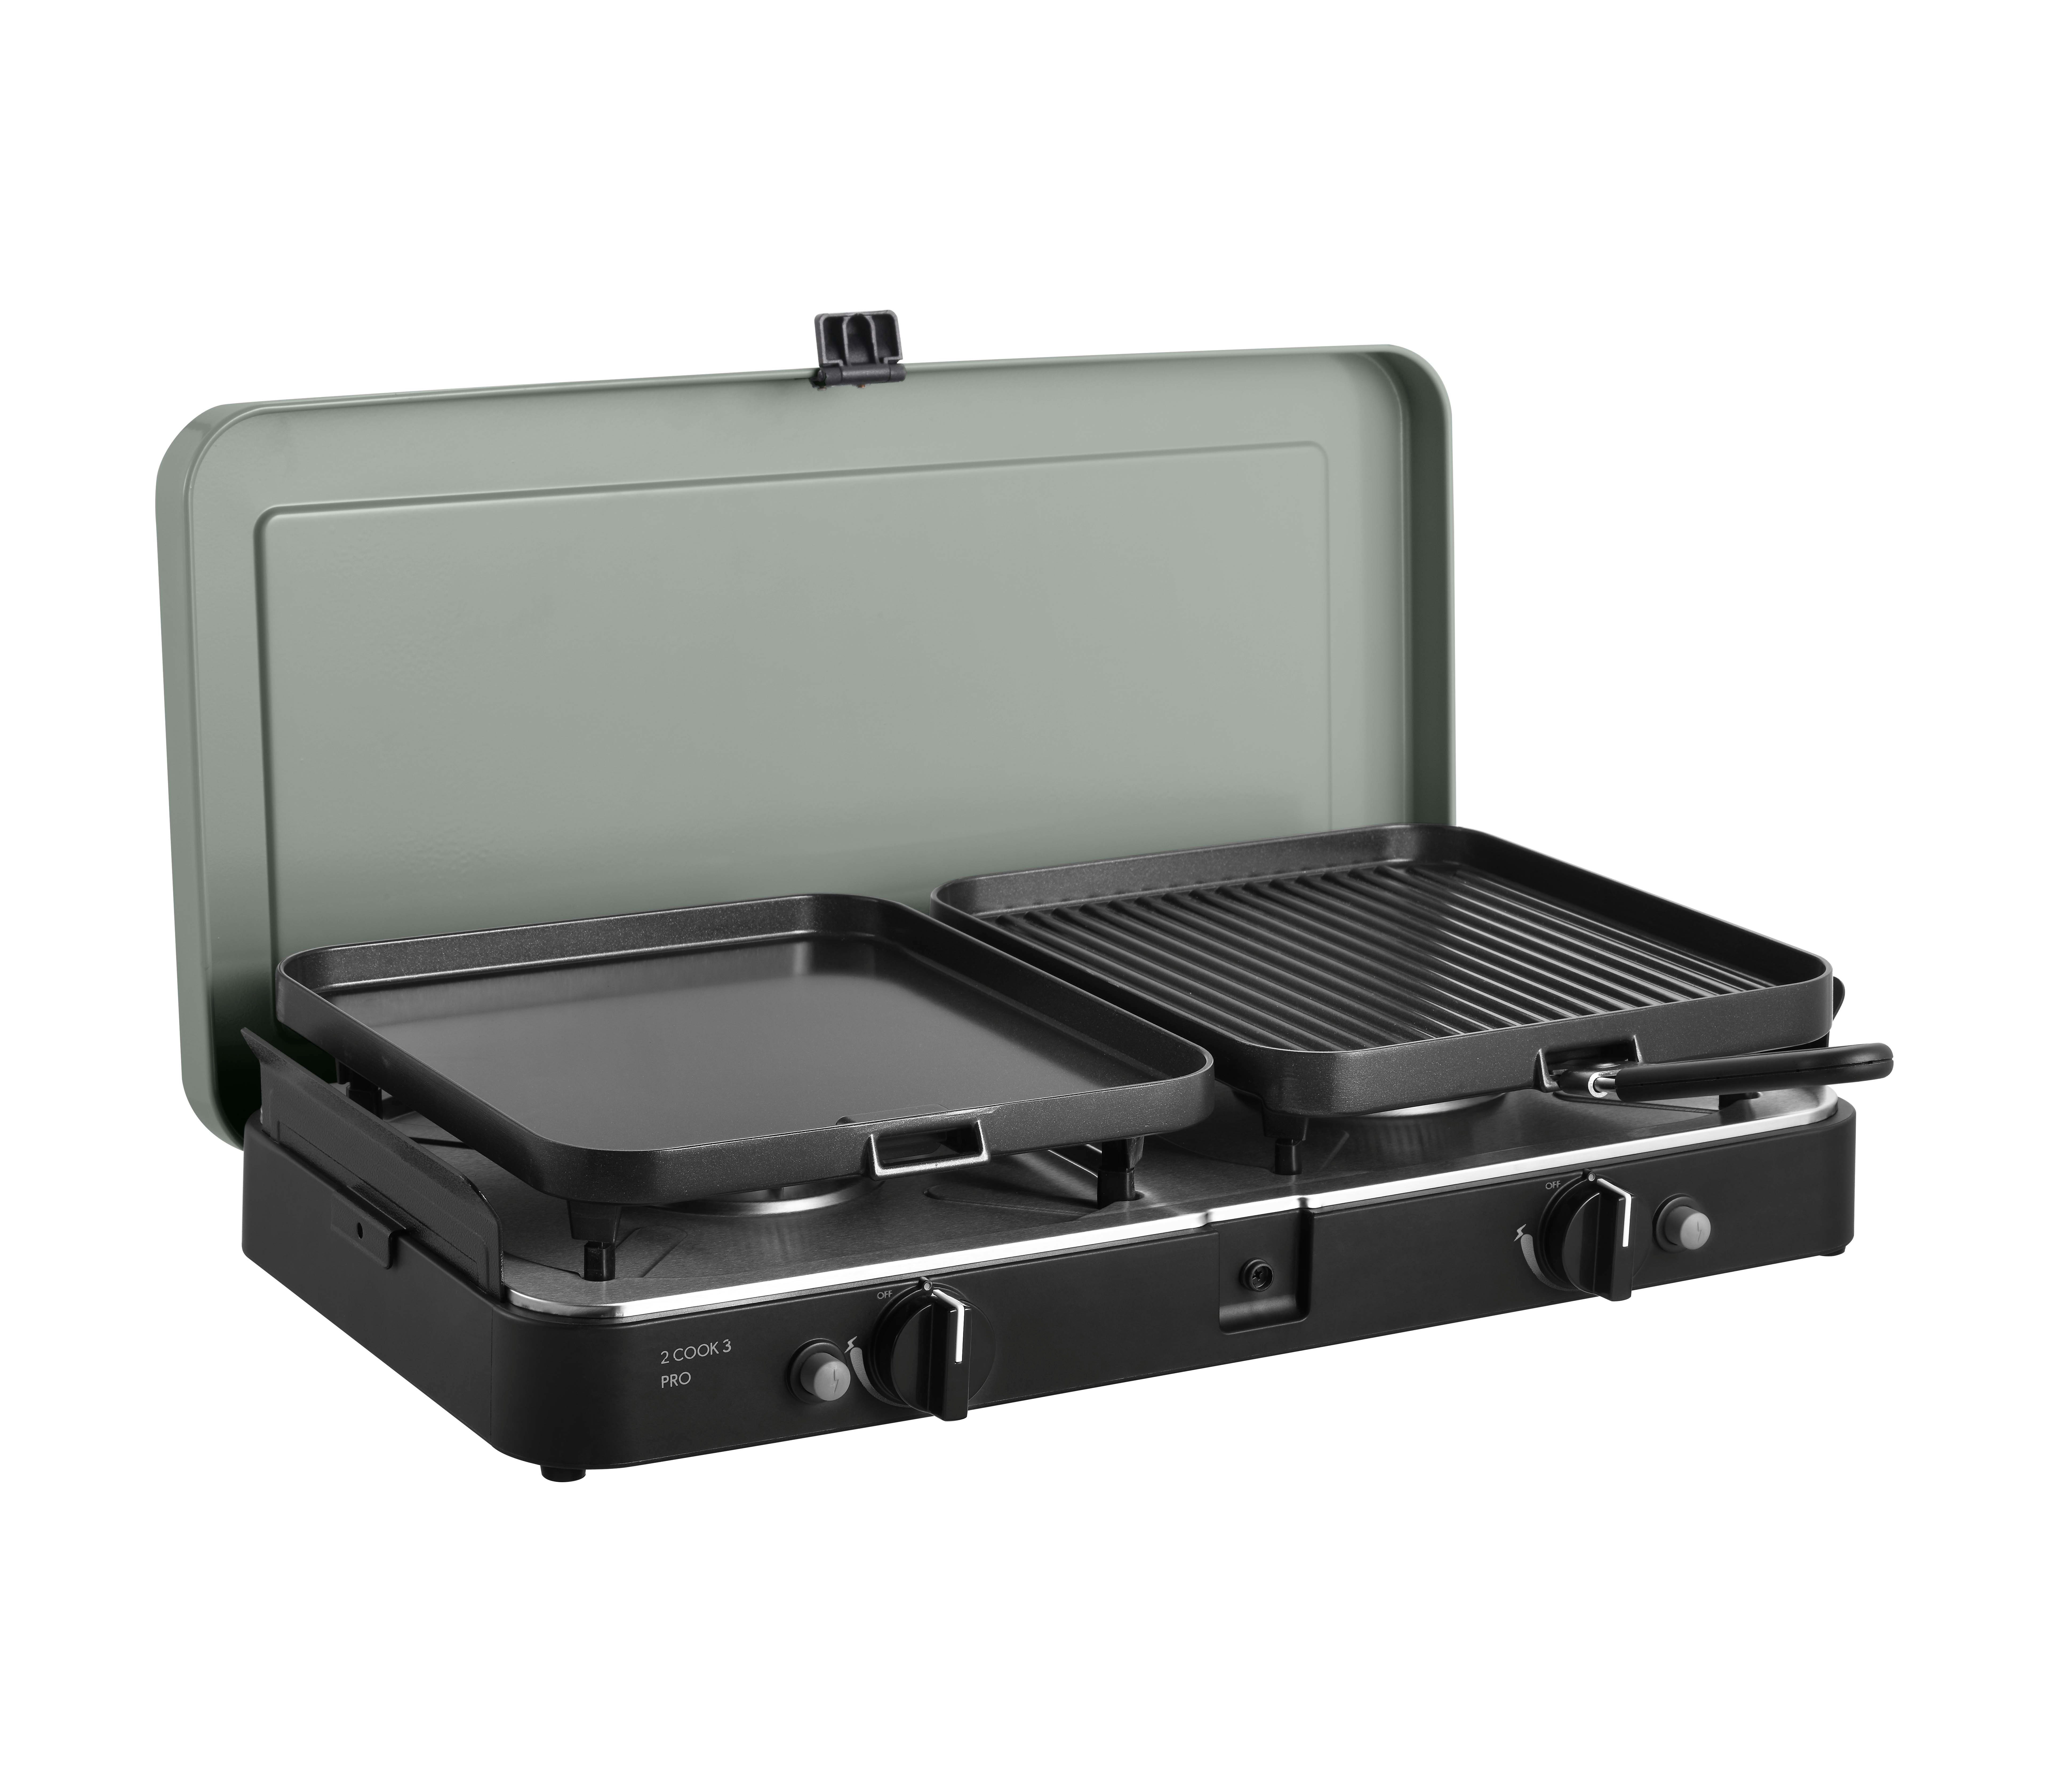 Pro 3 Deluxe CADAC 2 mbar Camping-Gasgrill Cook 50 CADAC